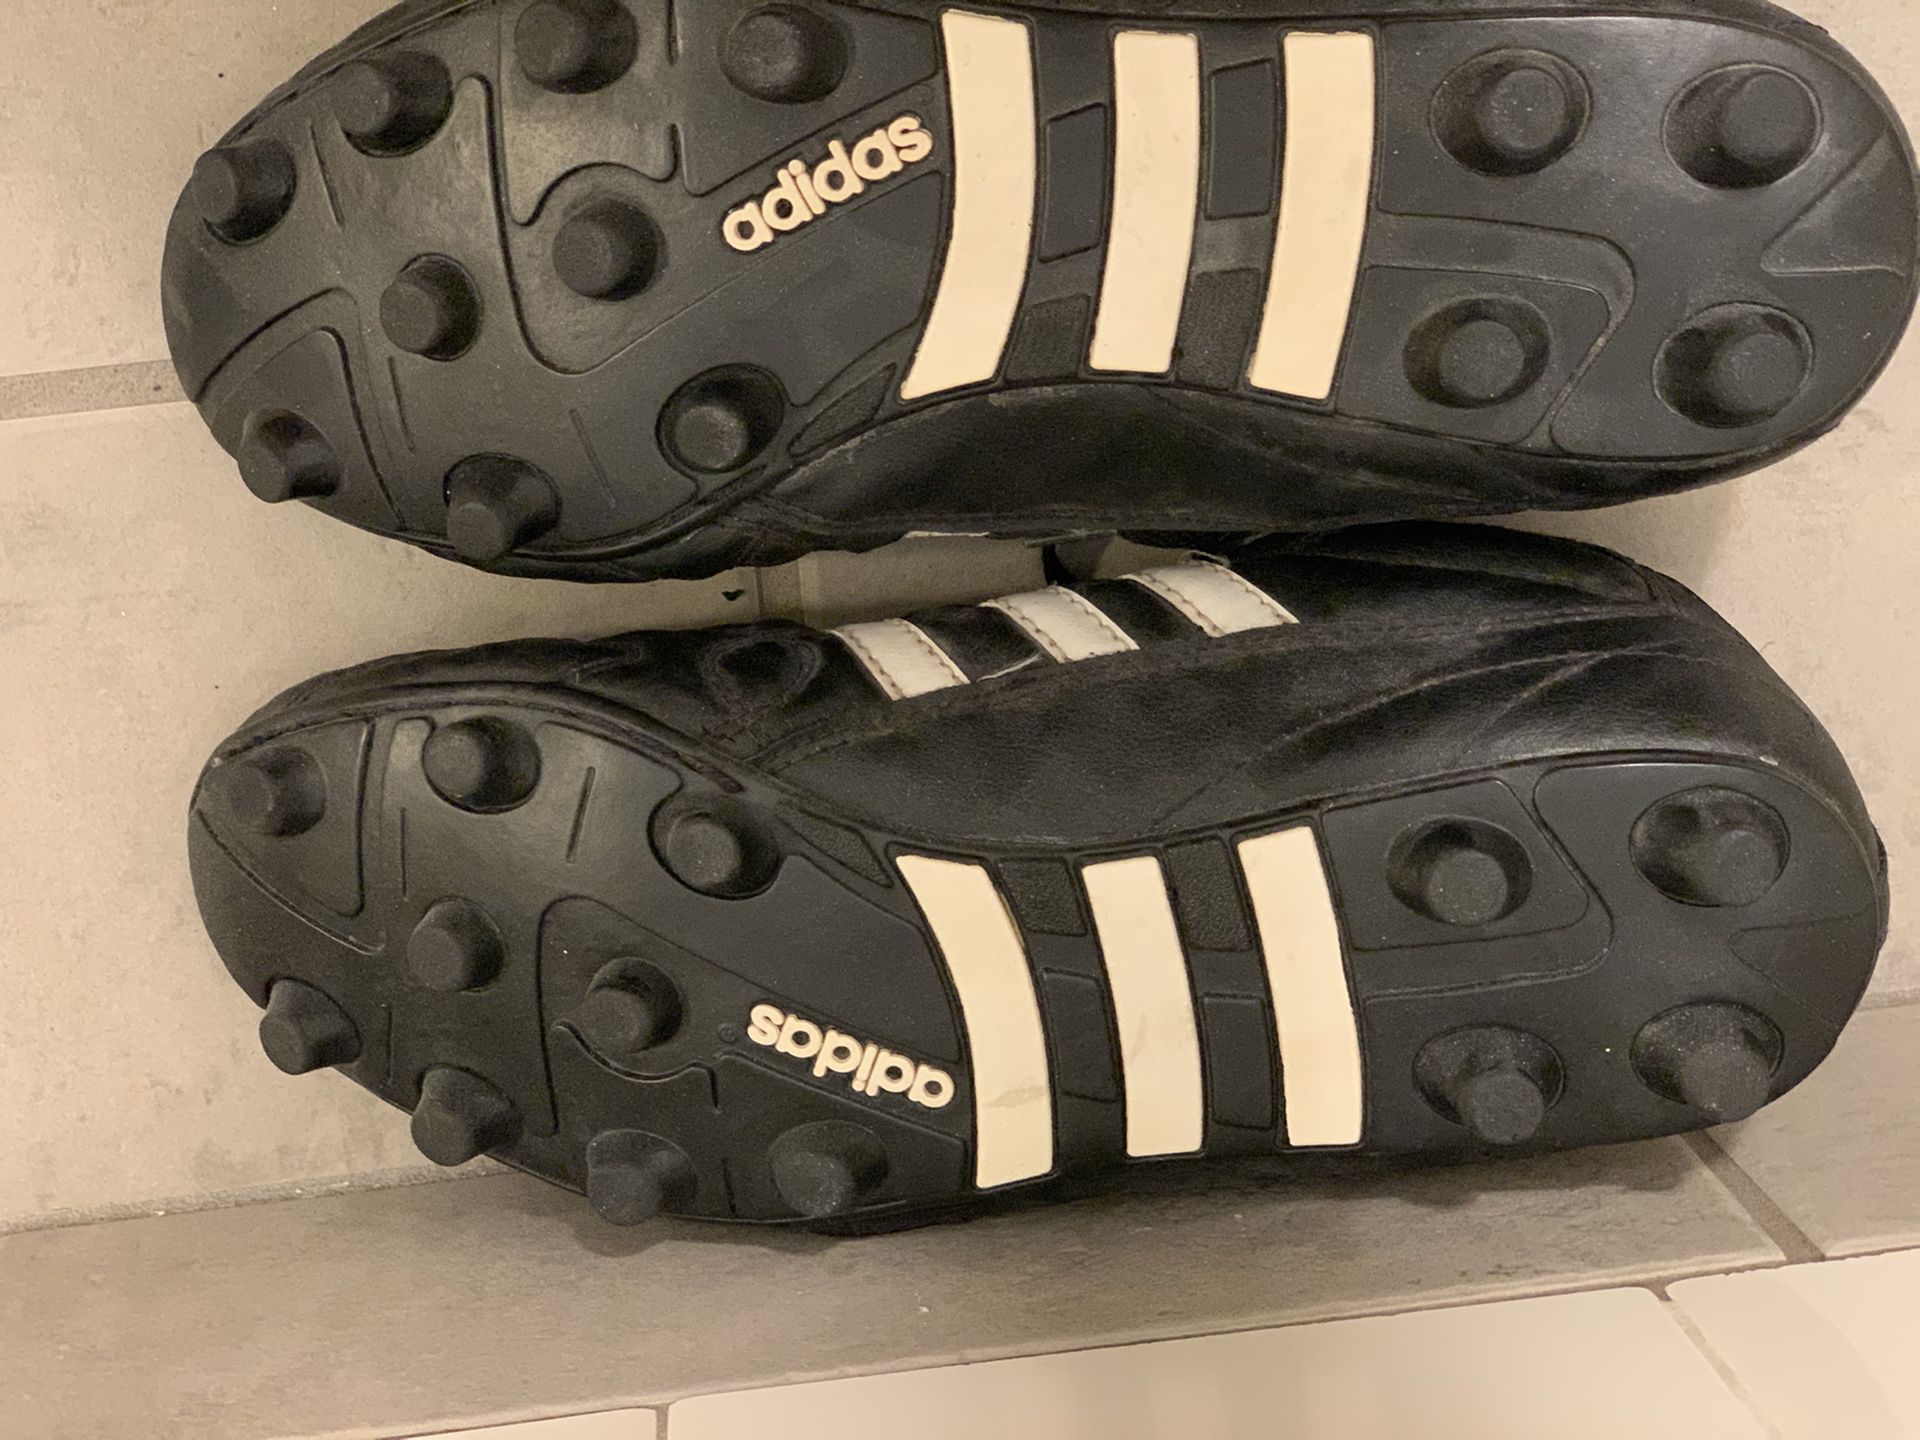 Adidas Soccer Cleats size 10.5